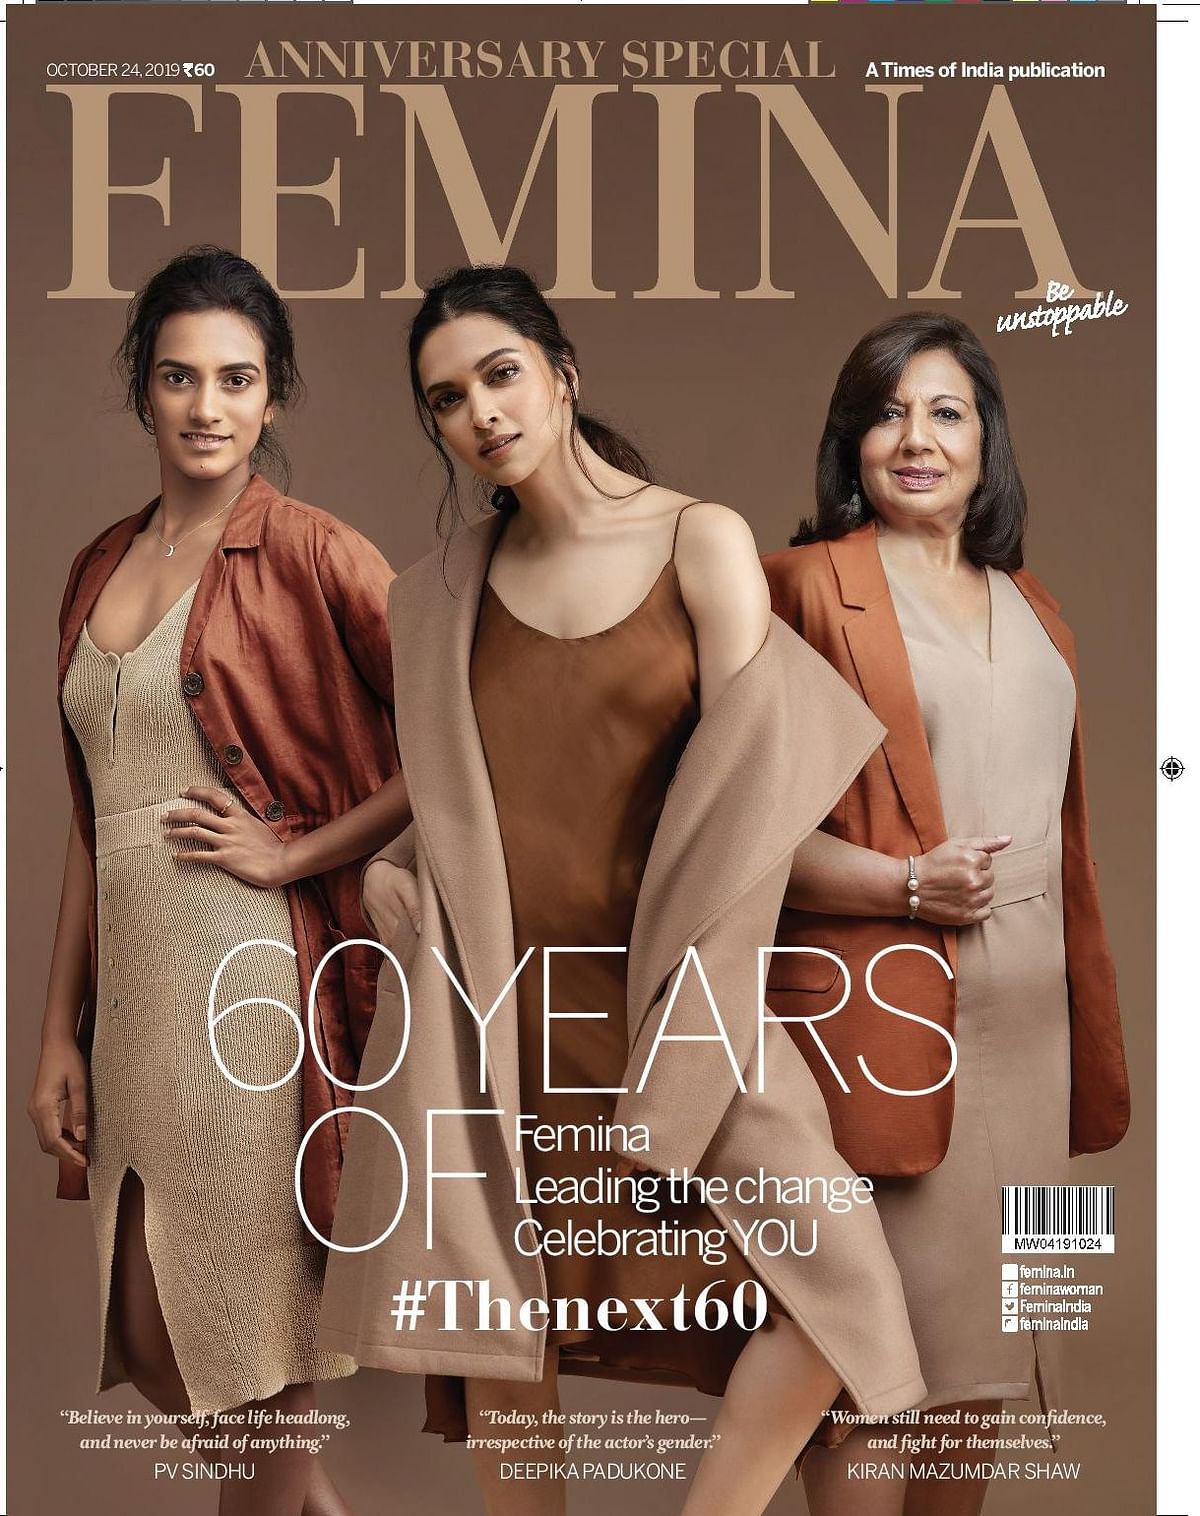 Femina celebrates 60 years of being a catalyst of change for Indian women